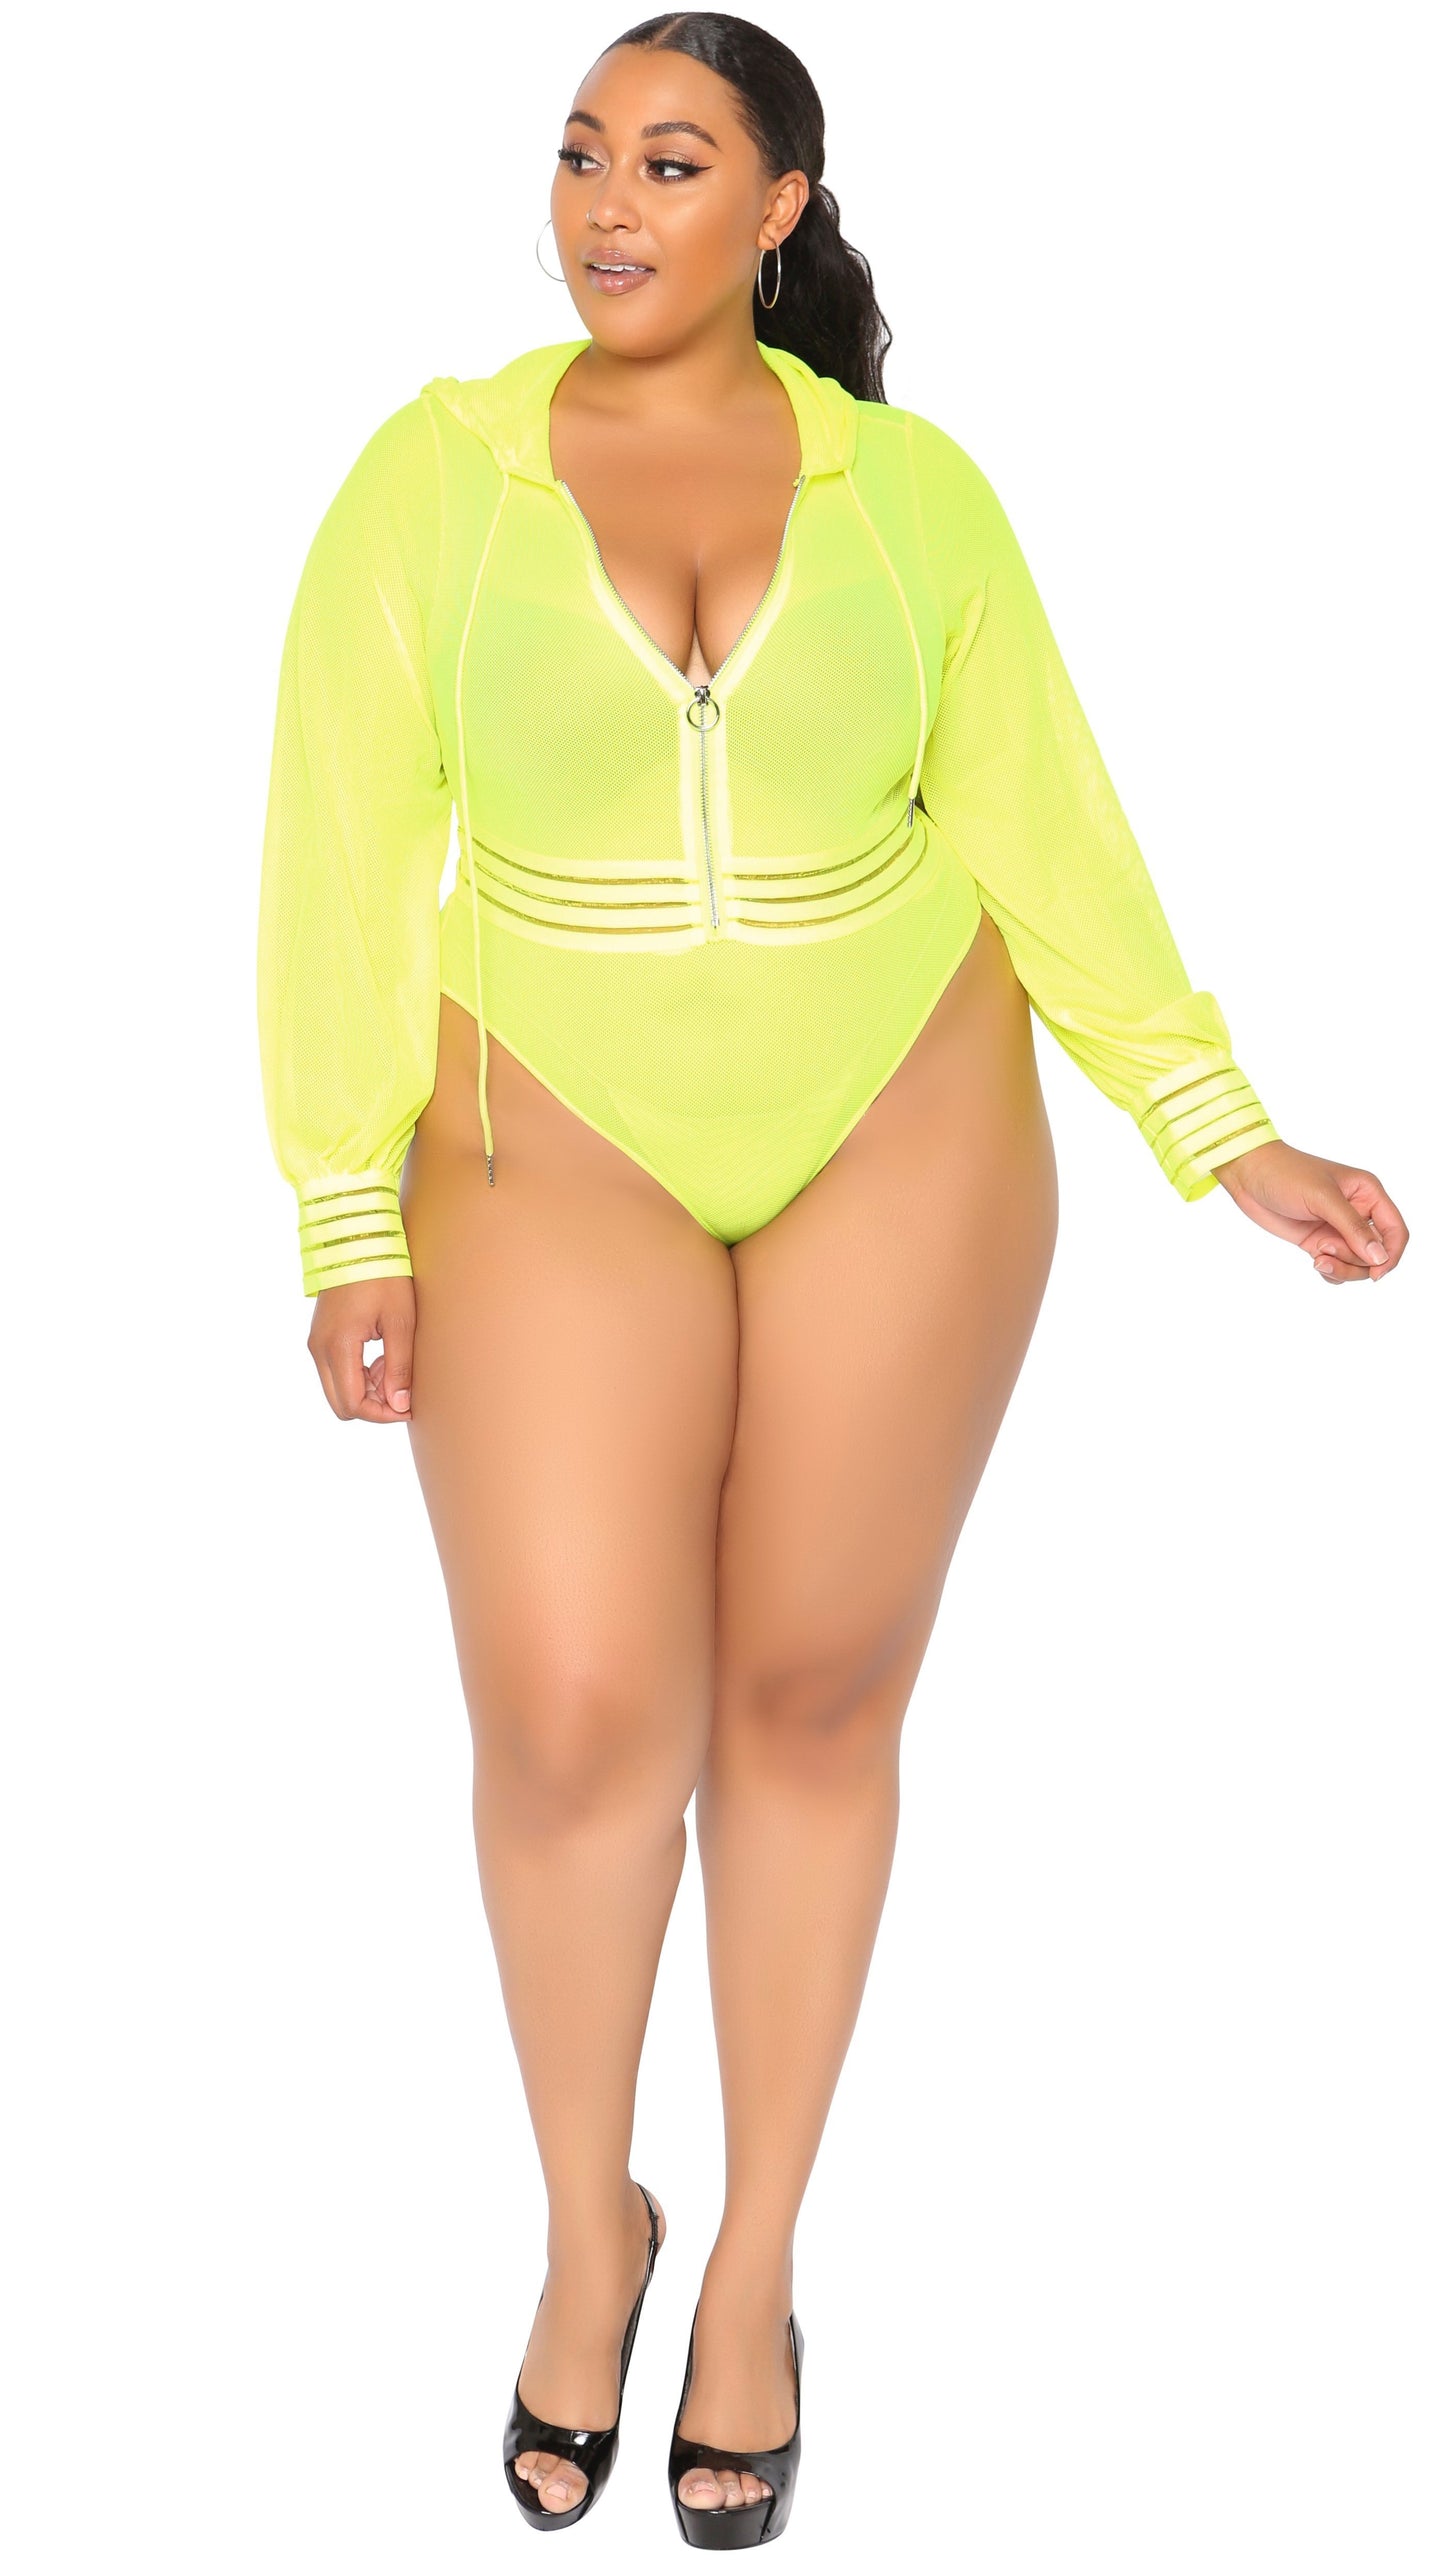 Too Much Sauce Hooded Bodysuit/Swimwear (Highlighter)-Bodysuits-Boughie-Boughie